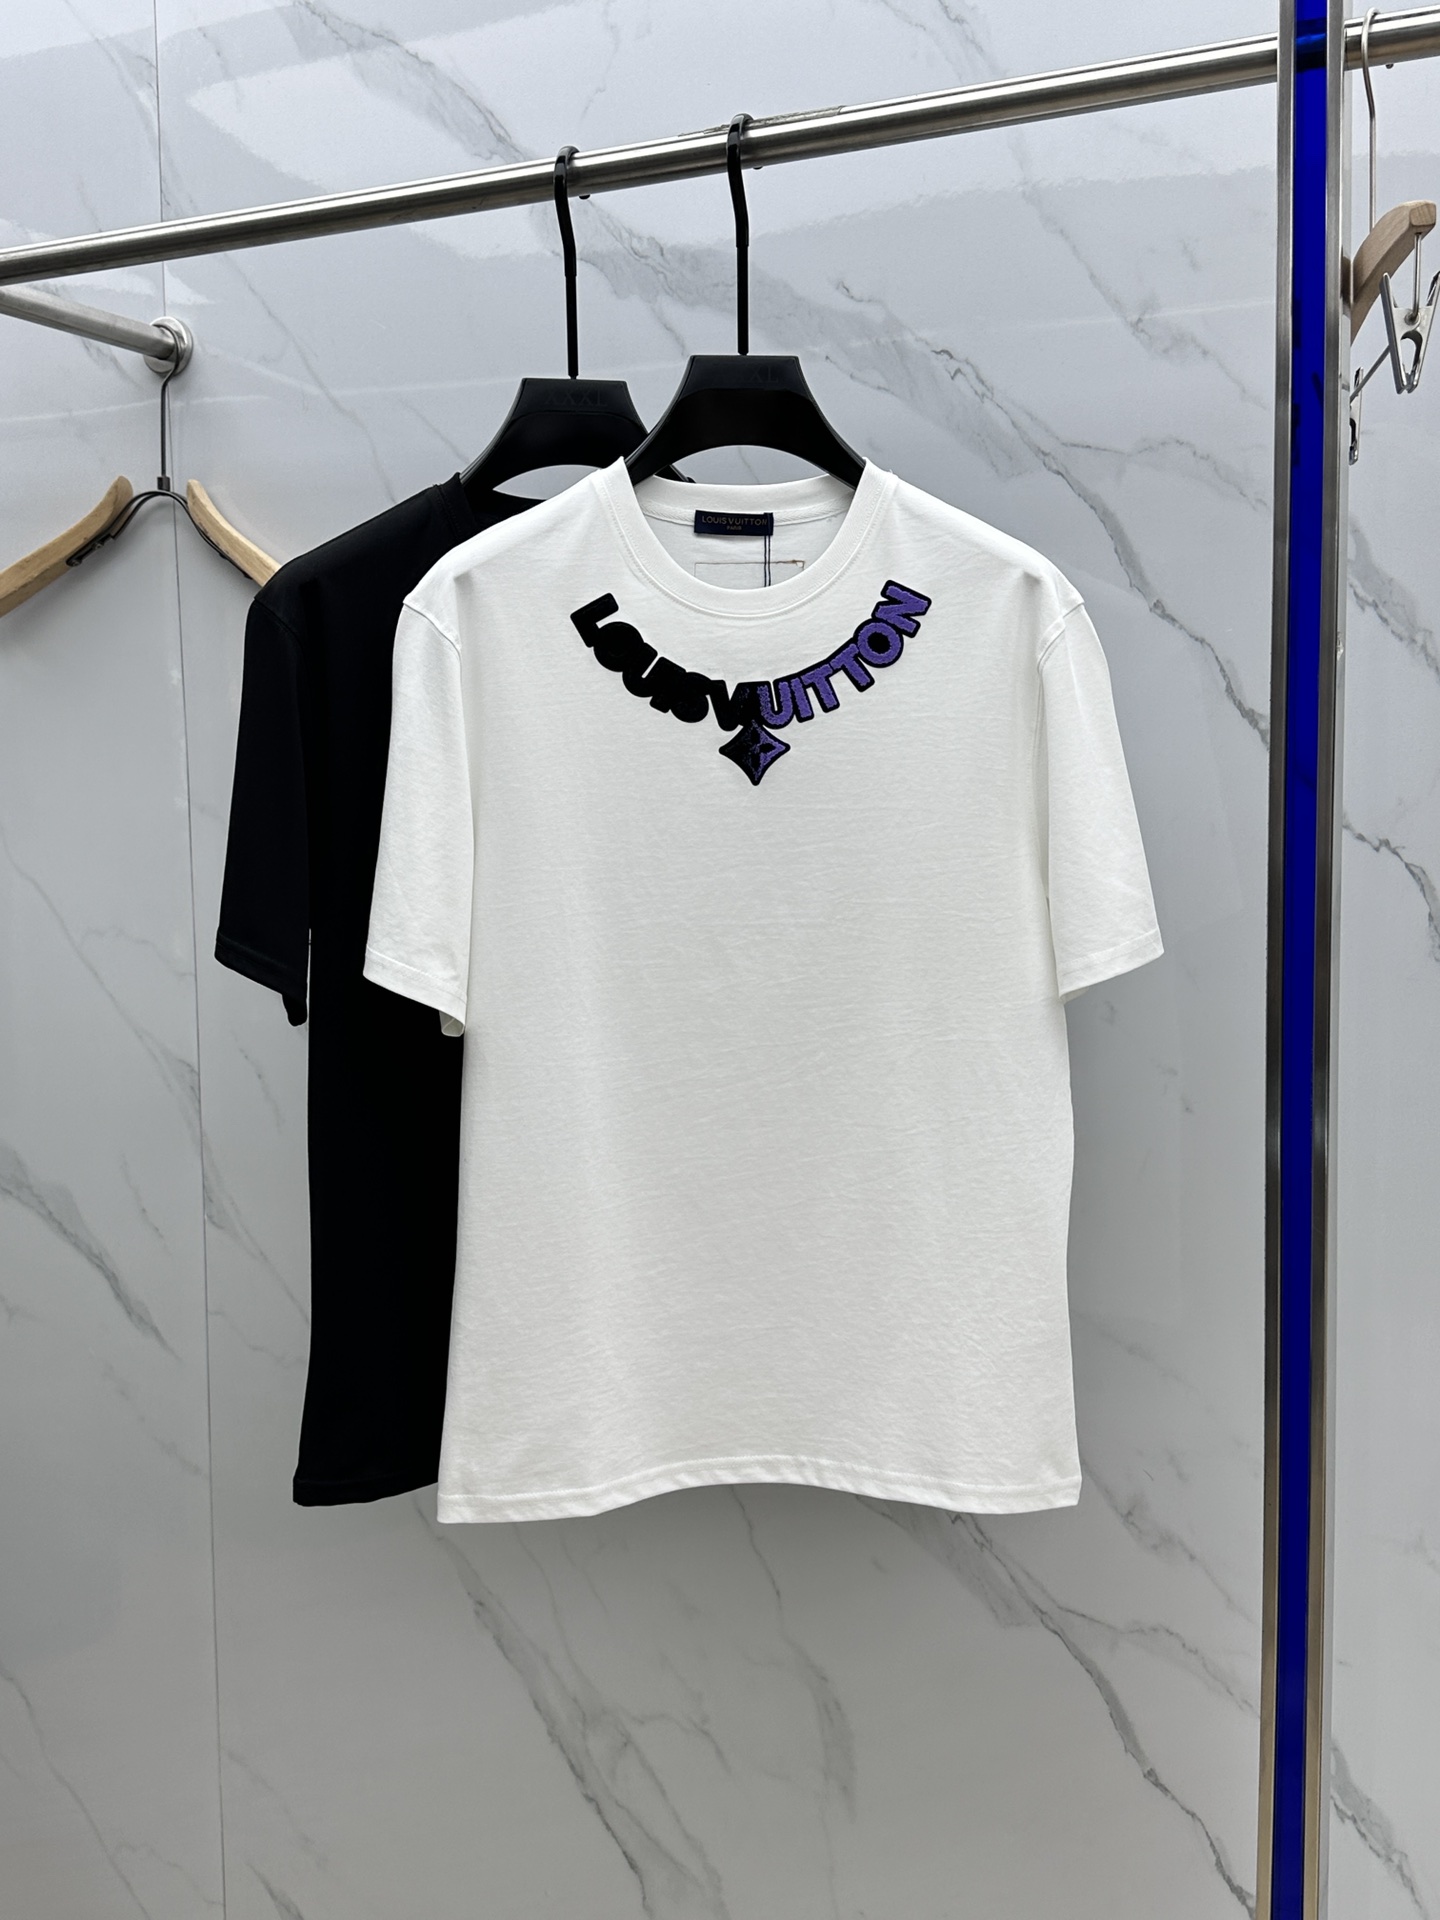 Louis Vuitton Clothing T-Shirt Embroidery Cotton Mercerized Summer Collection